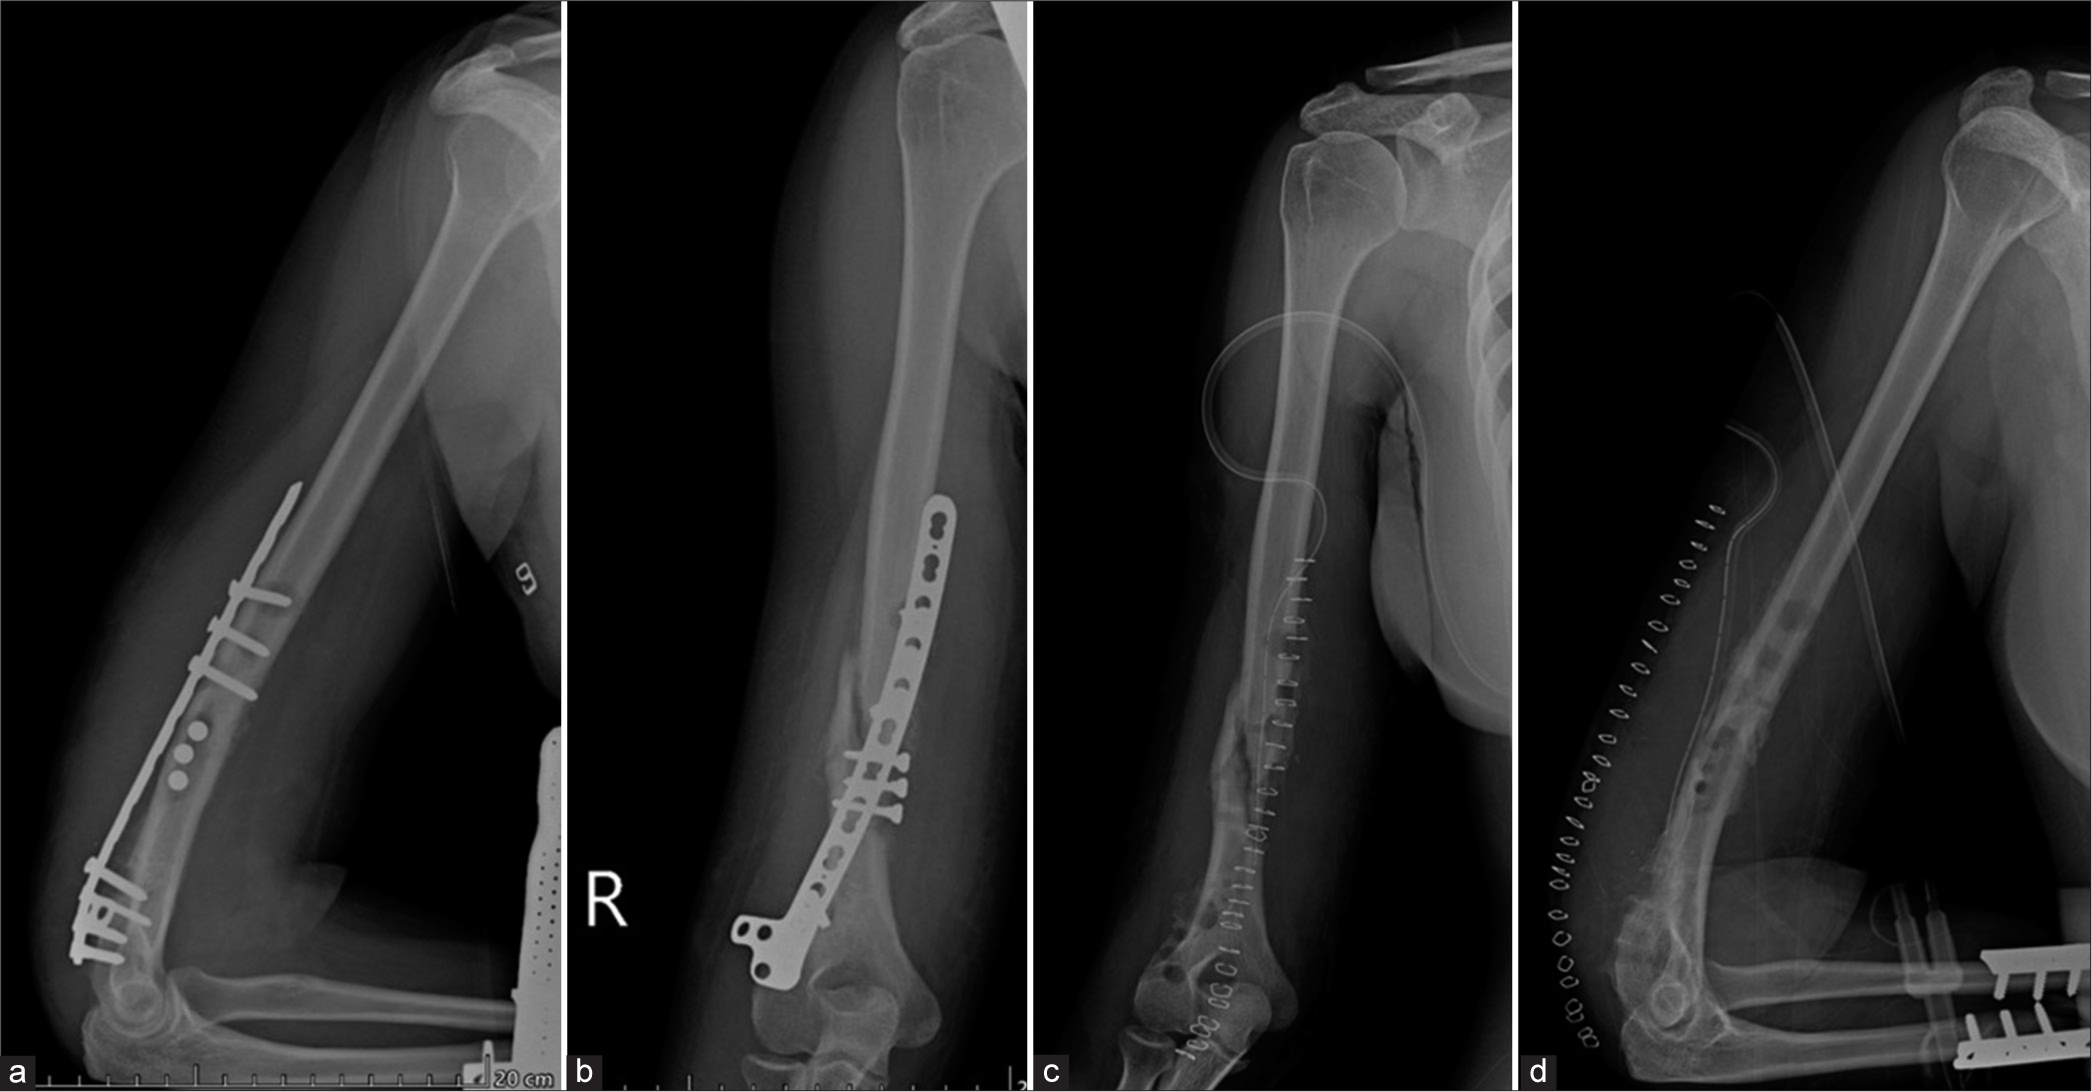 (a) Anterior posterior (AP) and (b) lateral views of the humerus. On the AP view, sclerotic fracture margins are seen suggesting oligotrophic nonunion, which is not identified on the lateral view. Alignment of bone is maintained. There is a loss of alignment of the compression plate on the AP view with a loss of contact distally, as seen on the lateral view. Well-defined lucencies are also seen around the proximal screws, indicating mechanical loosening. (c) AP and (d) lateral views of the humerus show surgical removal of the implant with the drain in situ. Also, note the compression plates for radial and fibular fractures on the lateral view.